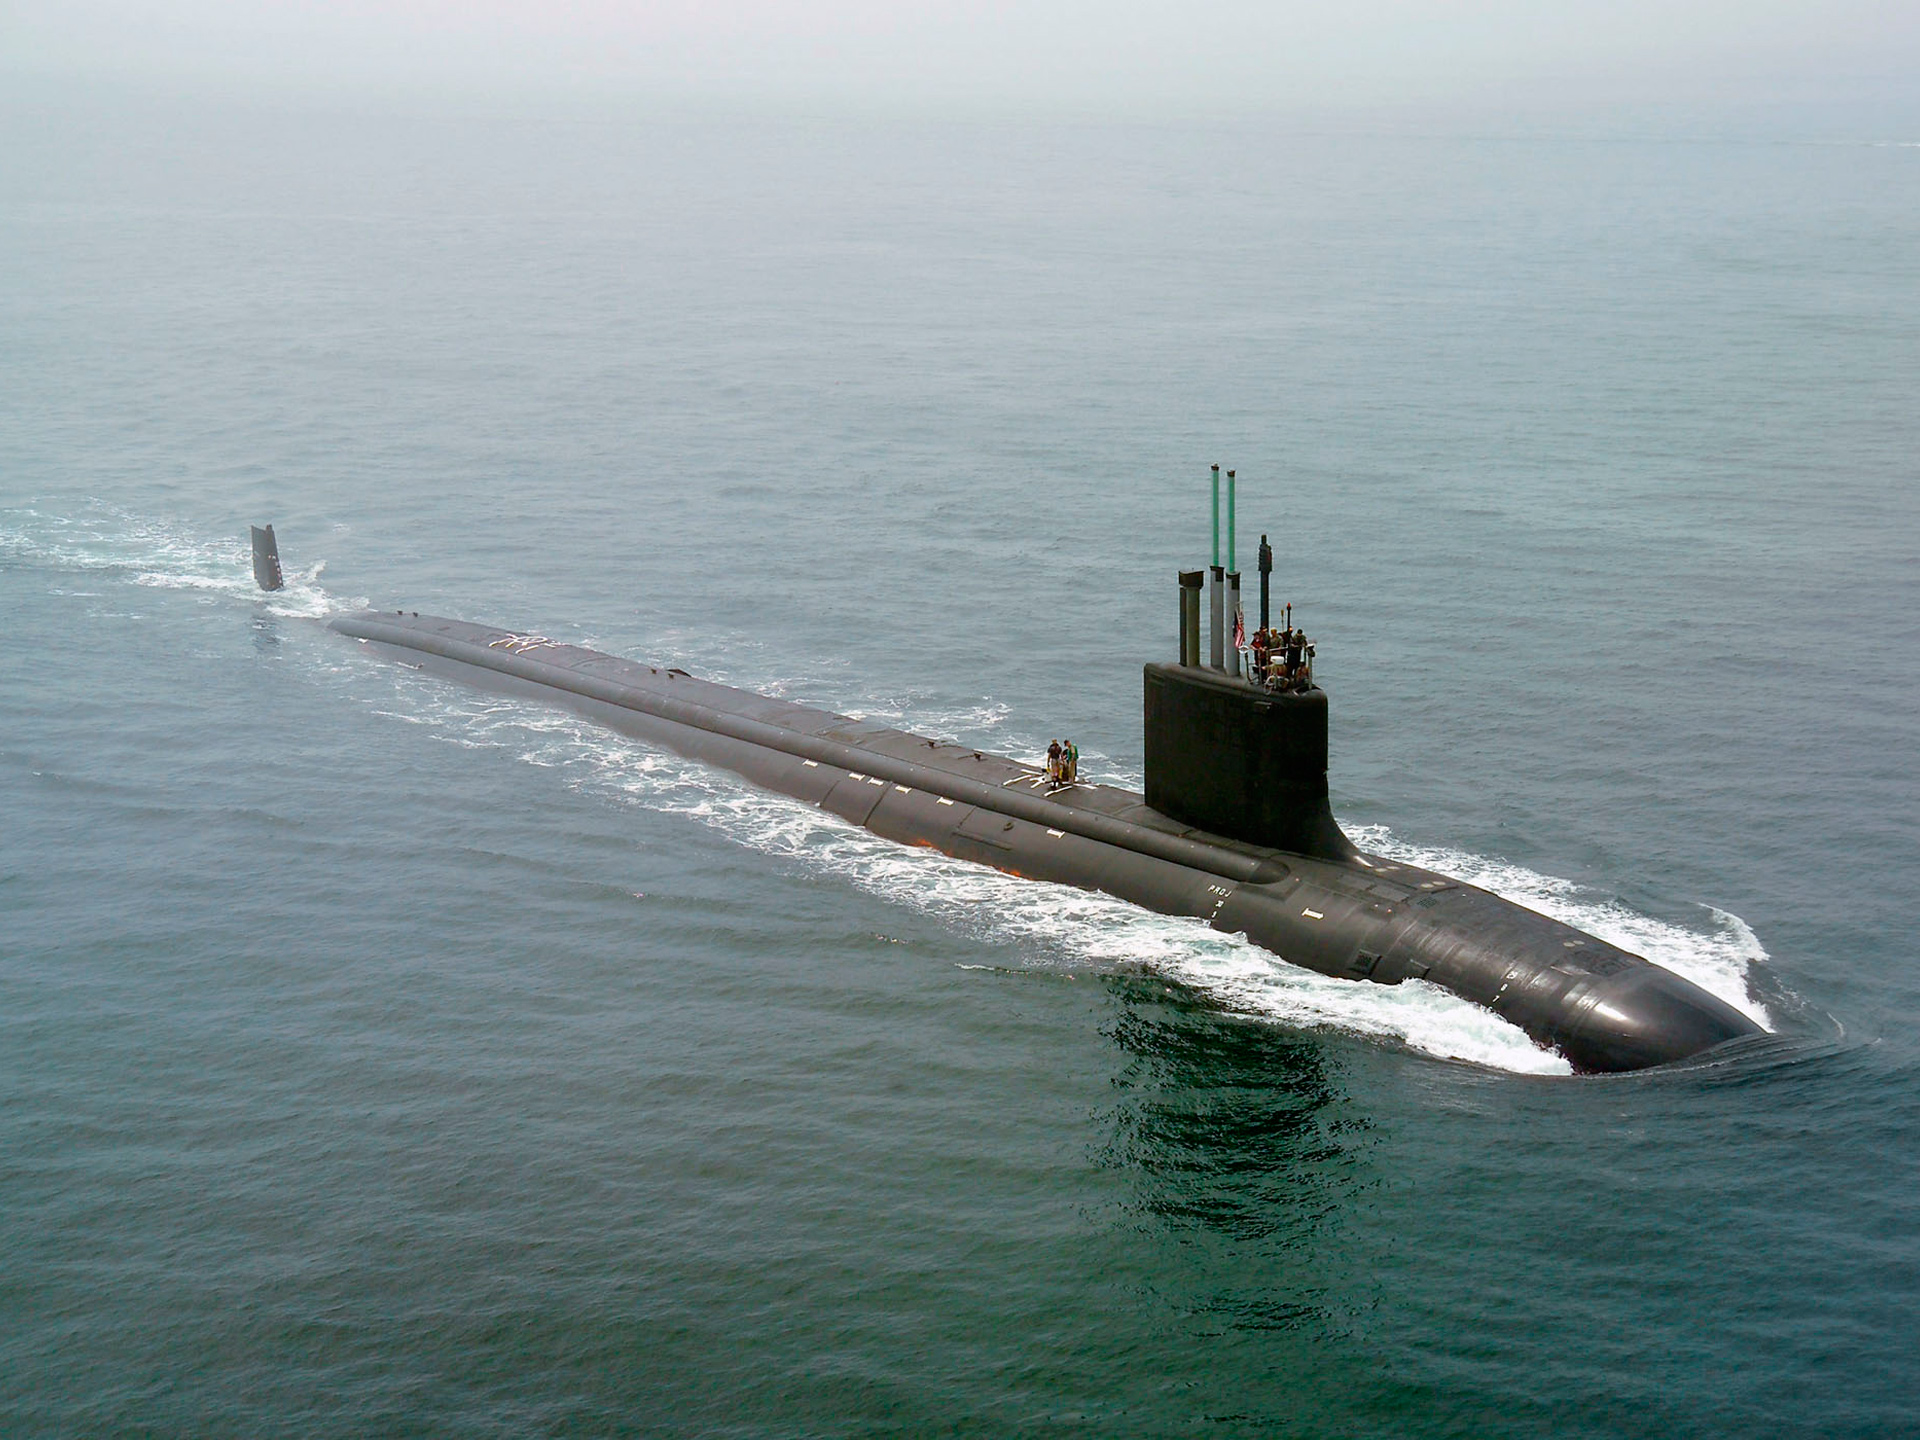 Free Wallpaper Wallpapers US Navy Submarines PicuresMilitary Nuclear 1920x1440